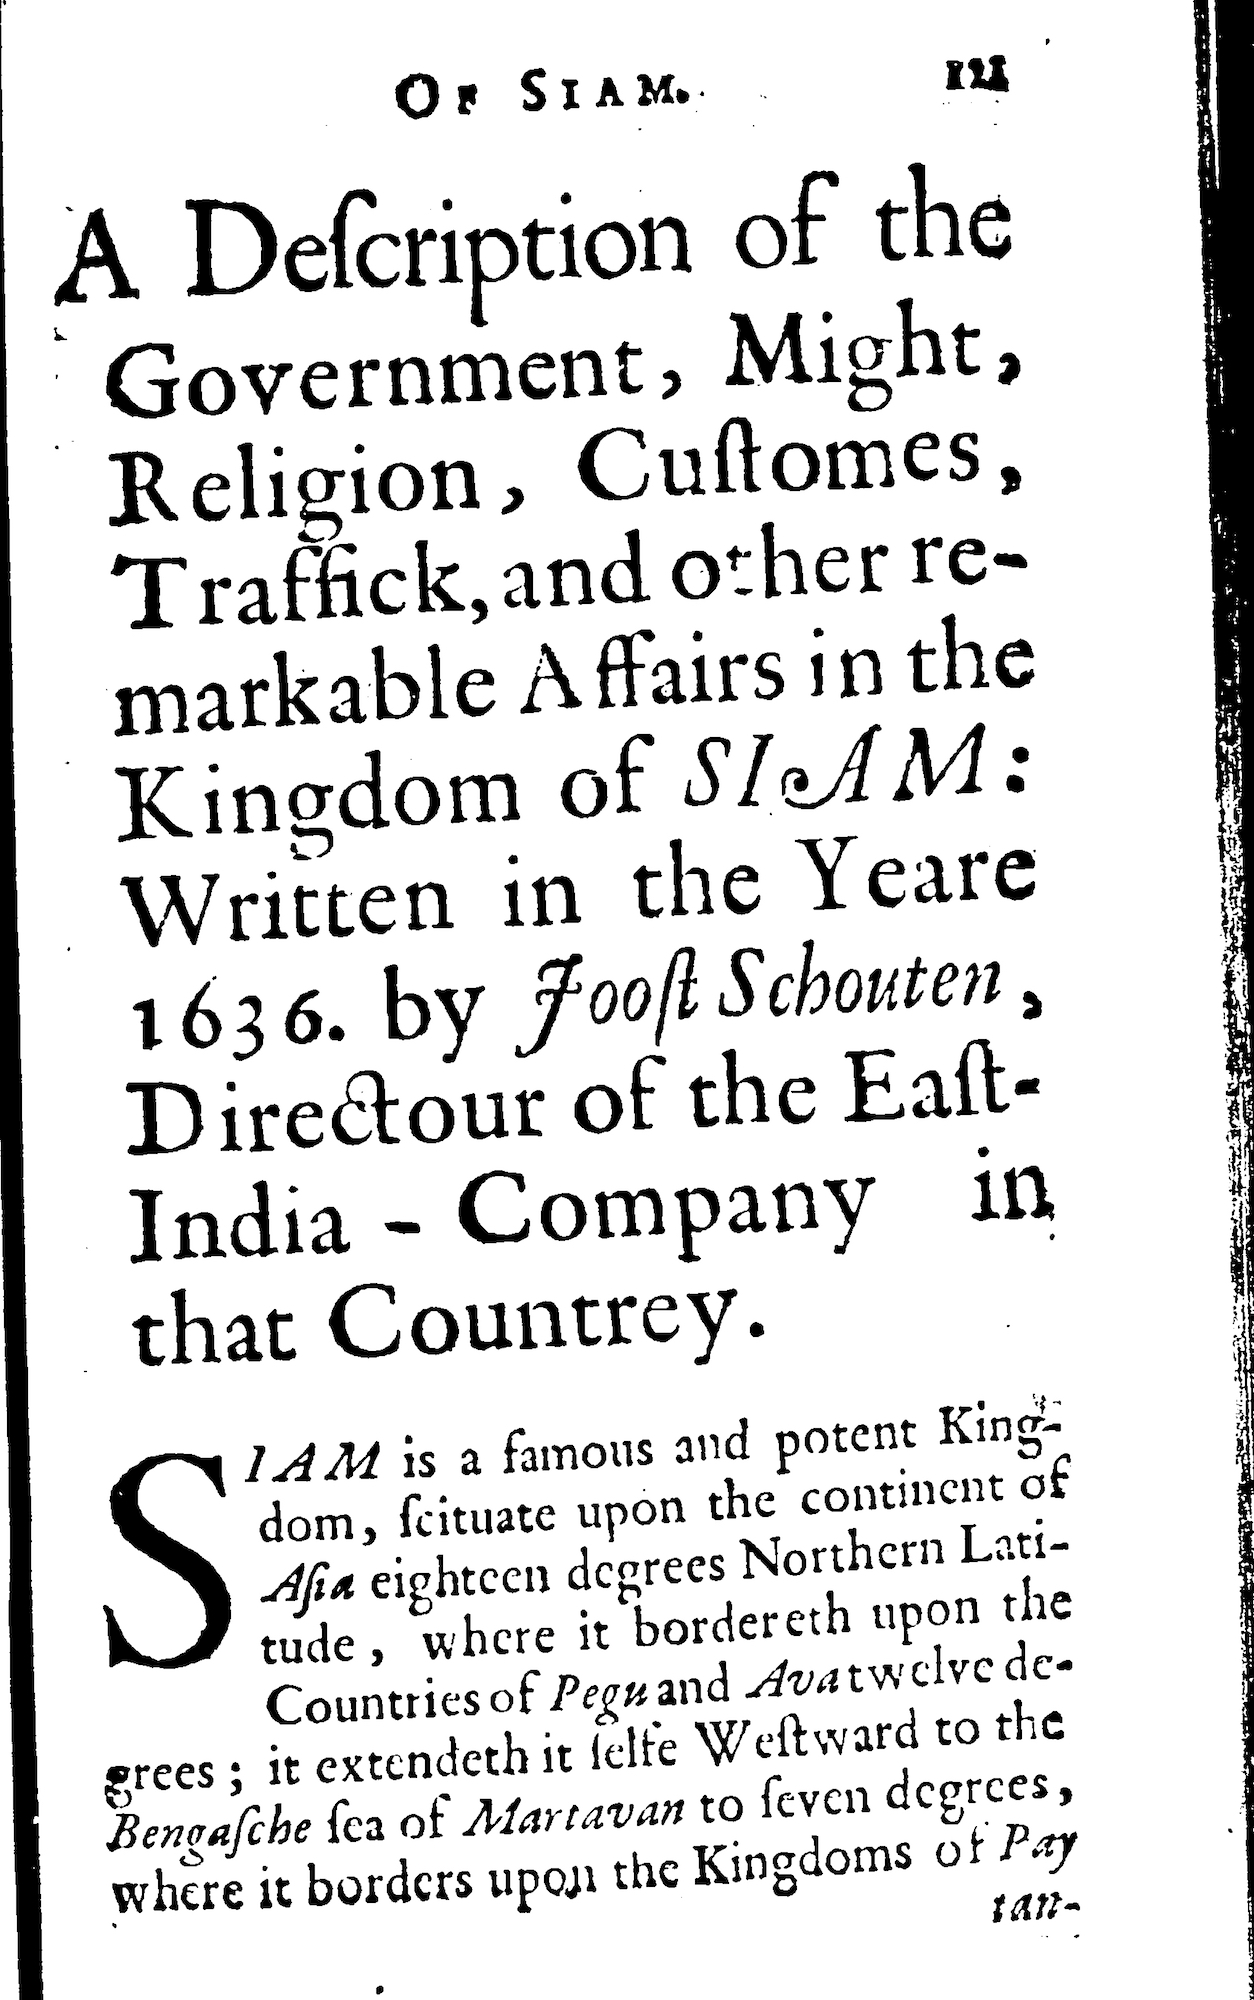 First page of Joost Schouten’s description of Siam